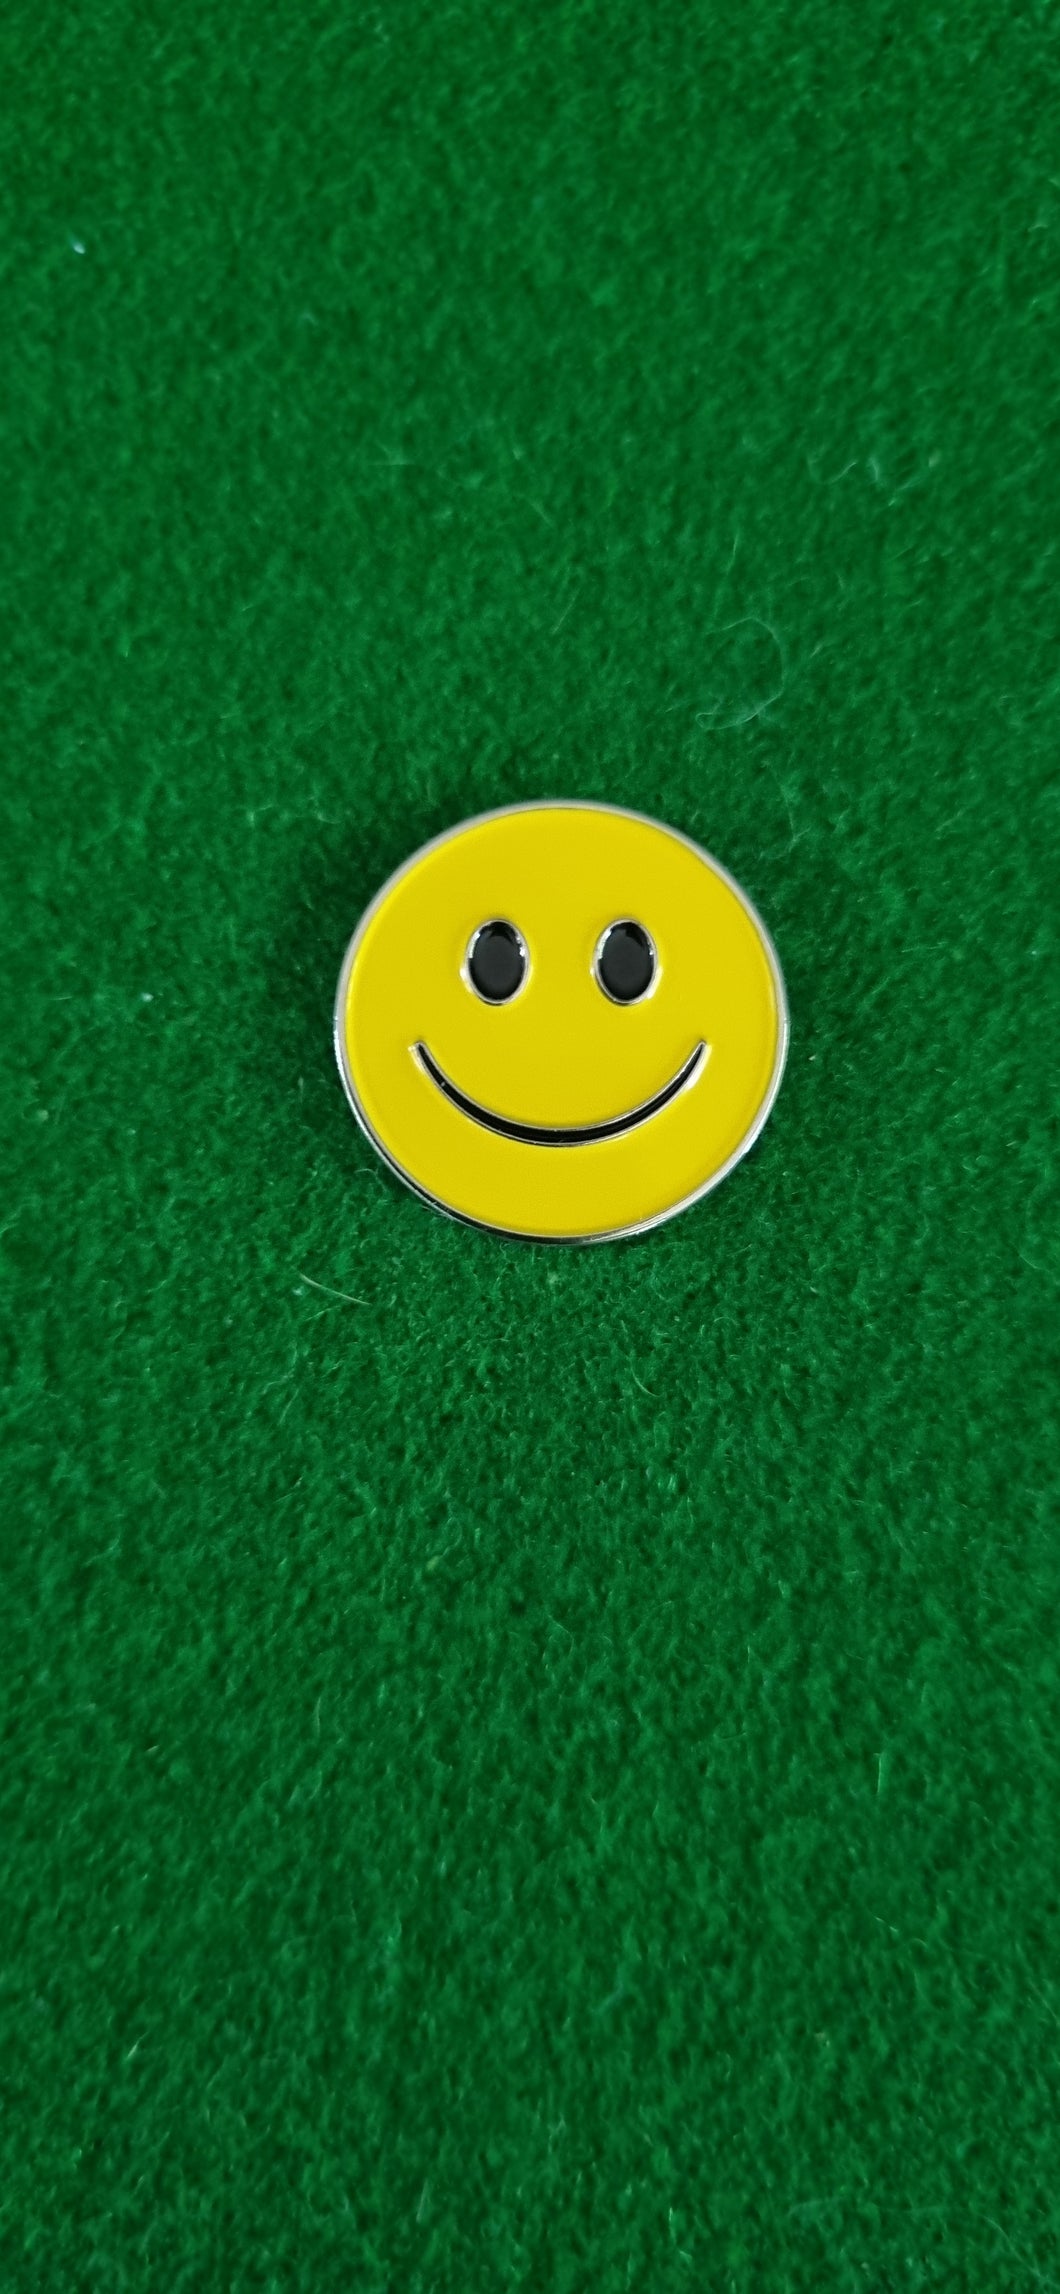 Golf Ball Marker with Magnetic Hat Clip - Smiley Face - New